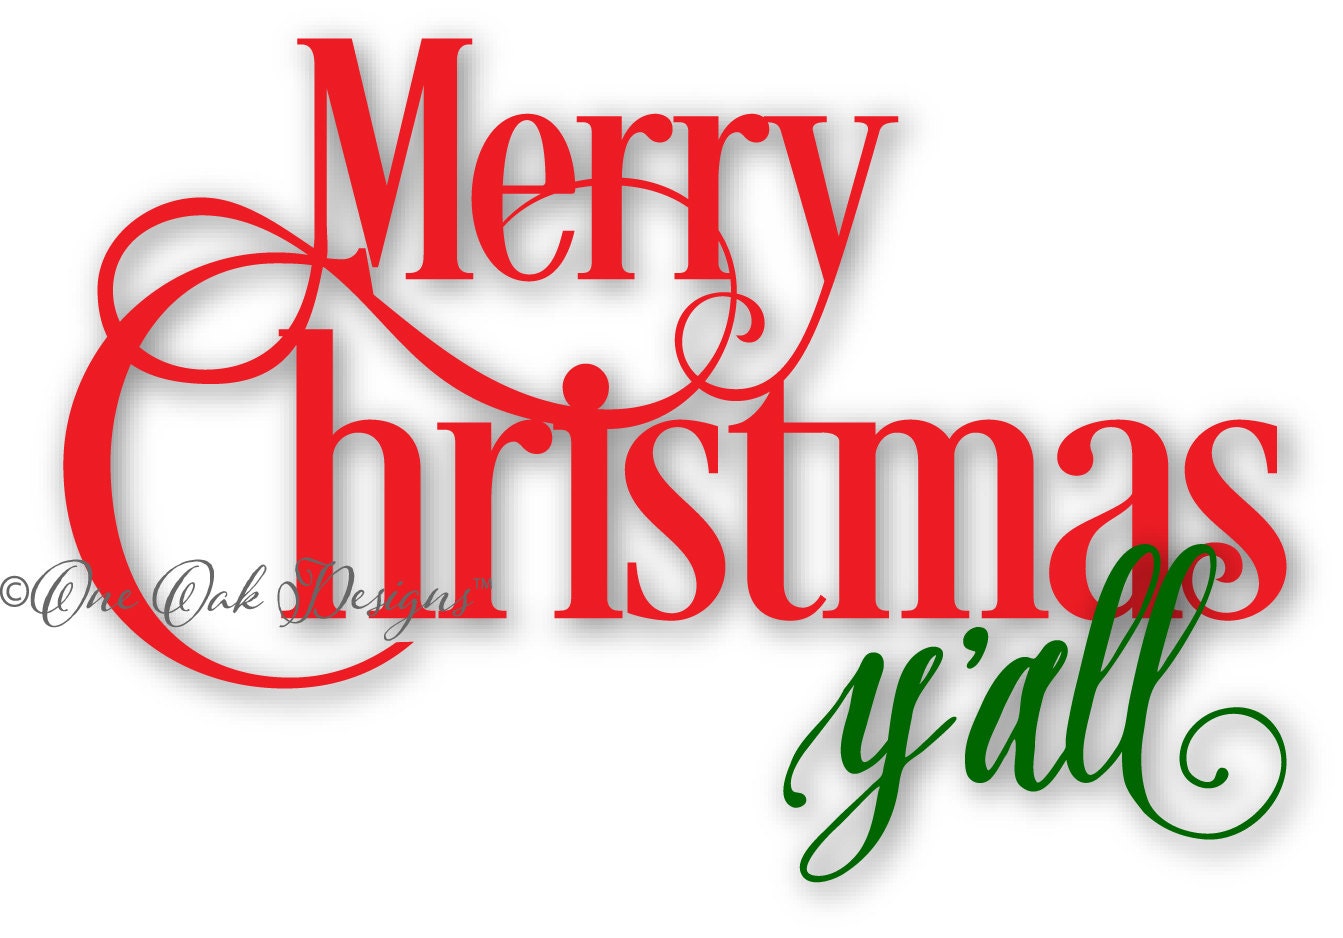 Download Merry Christmas Yall SVG File / PDF / dxf / png / jpg / ai